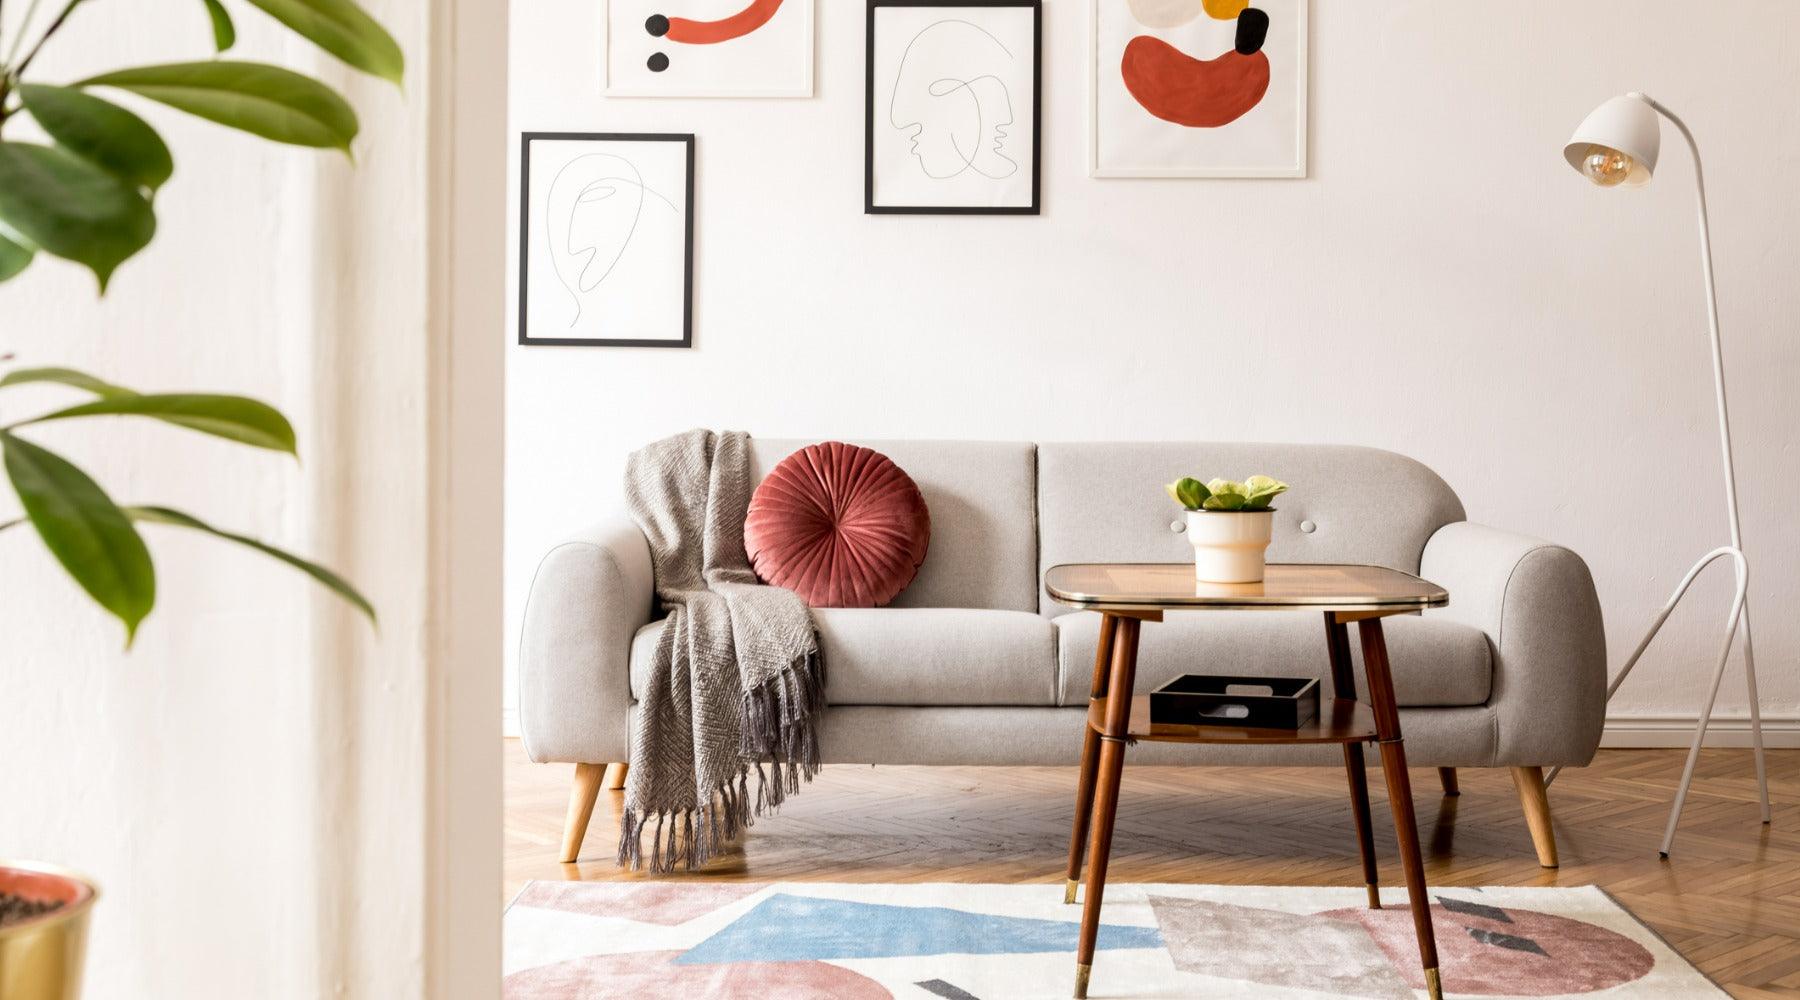 How To Combine Scandinavian Design With Other Design Styles